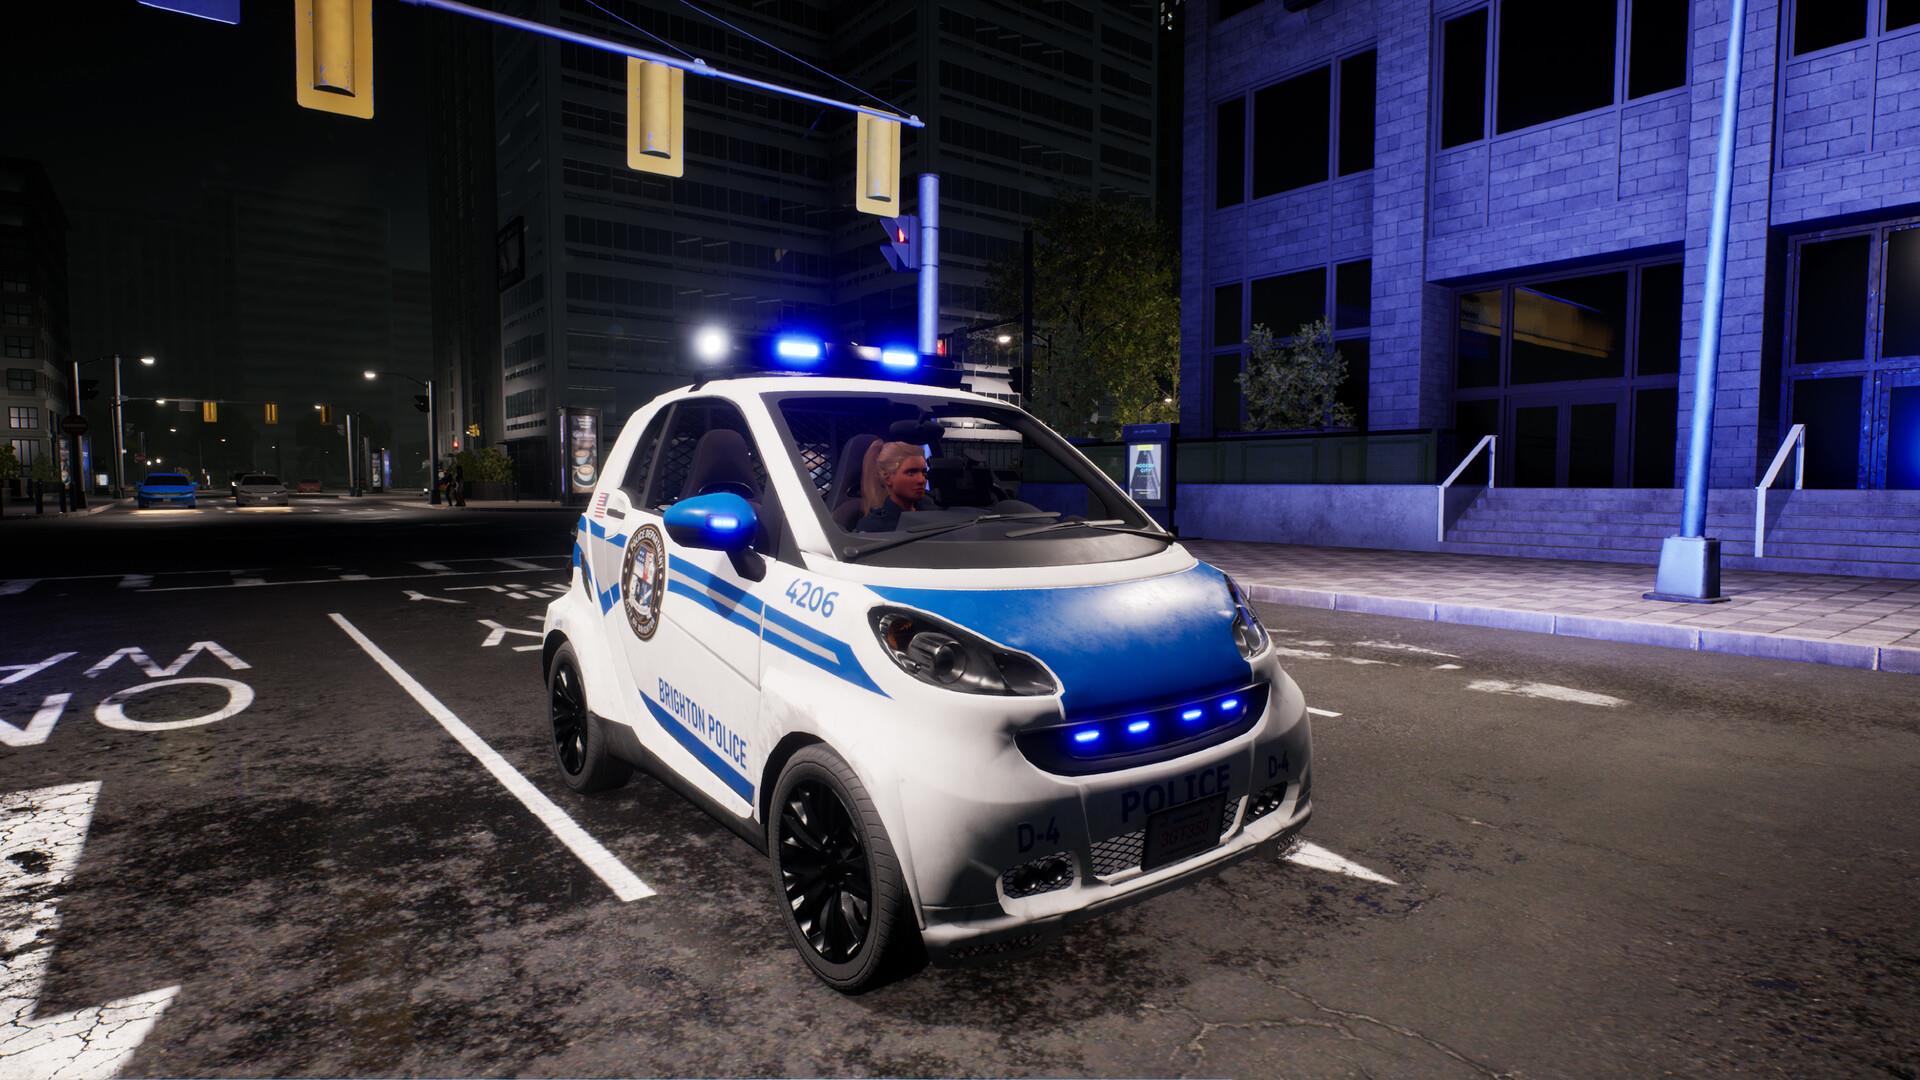 Police Simulator: Patrol Officers keeps getting better, new DLC released